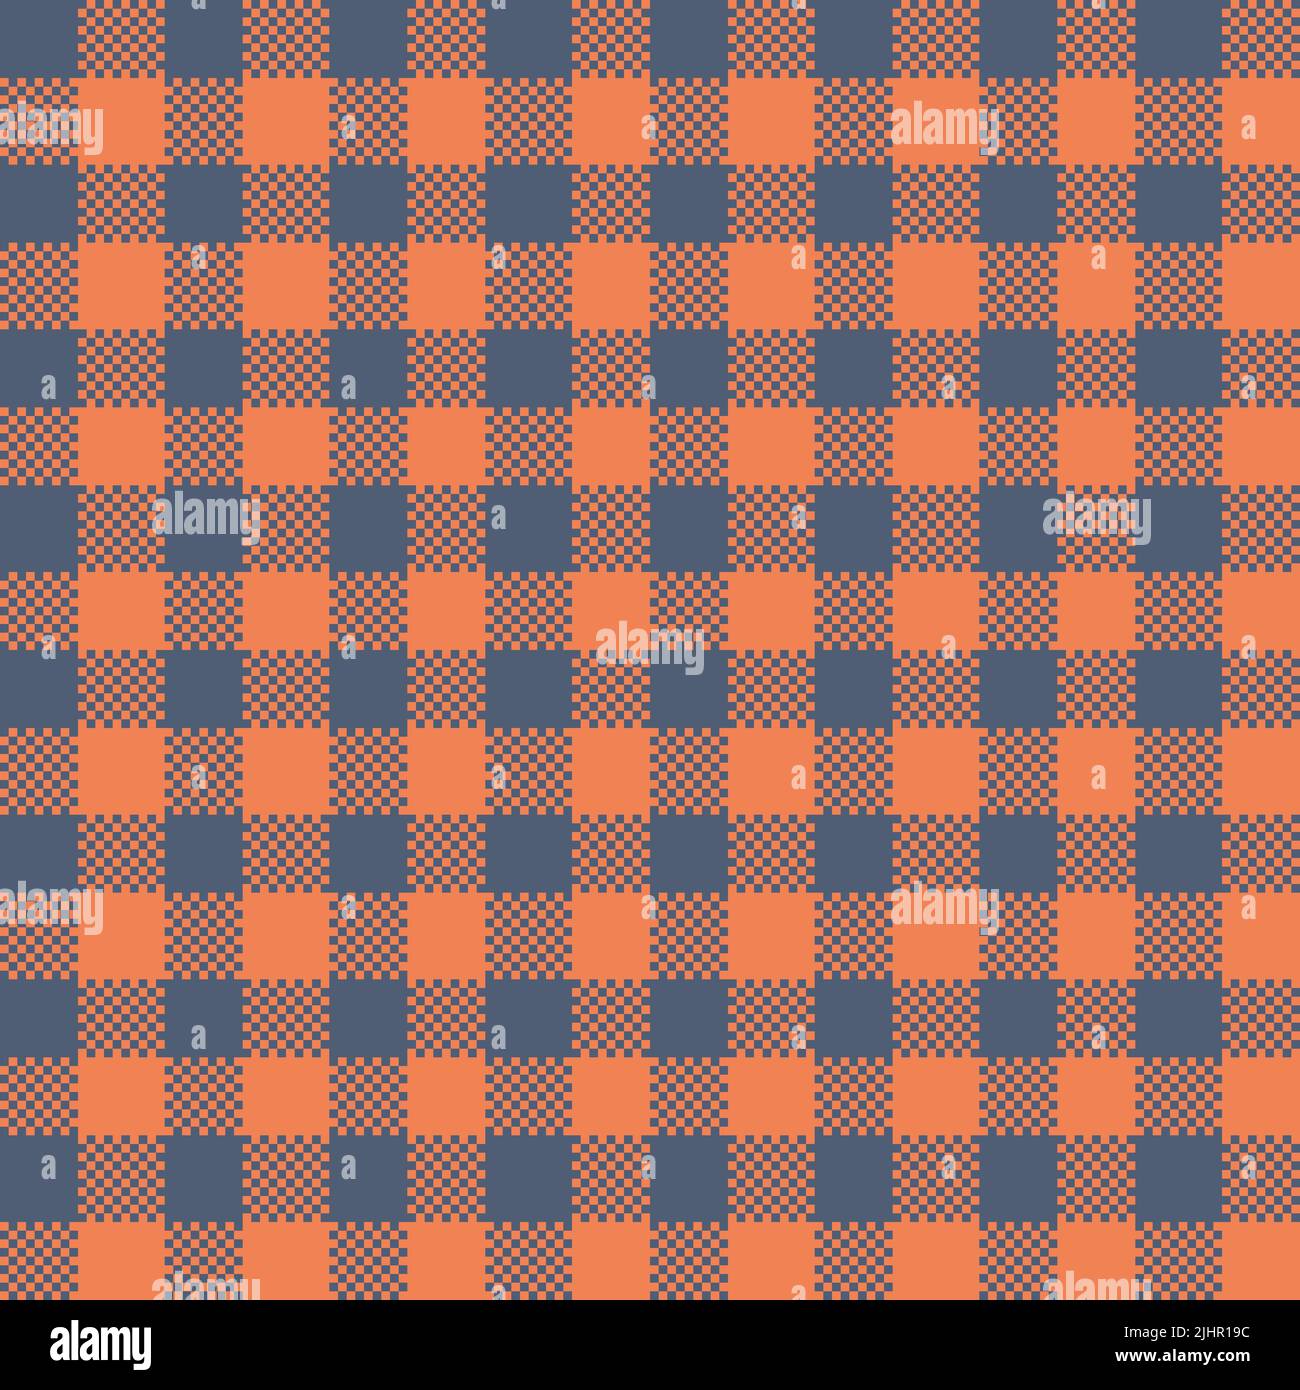 Coral plaid pattern stock Alamy images and hi-res - background photography